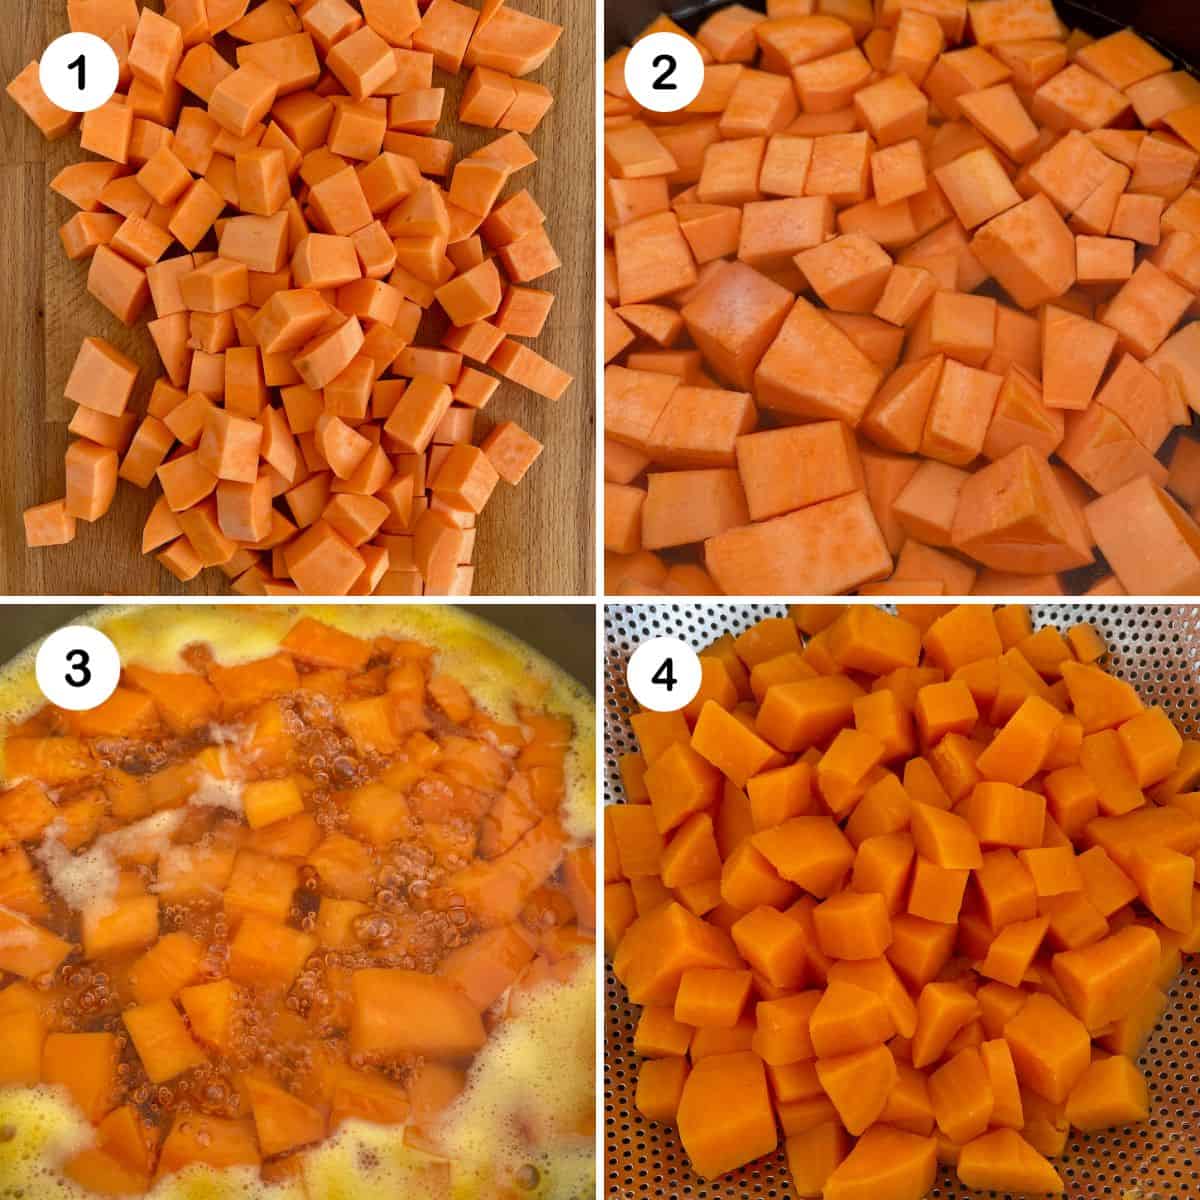 Steps for cooking sweet potatoes